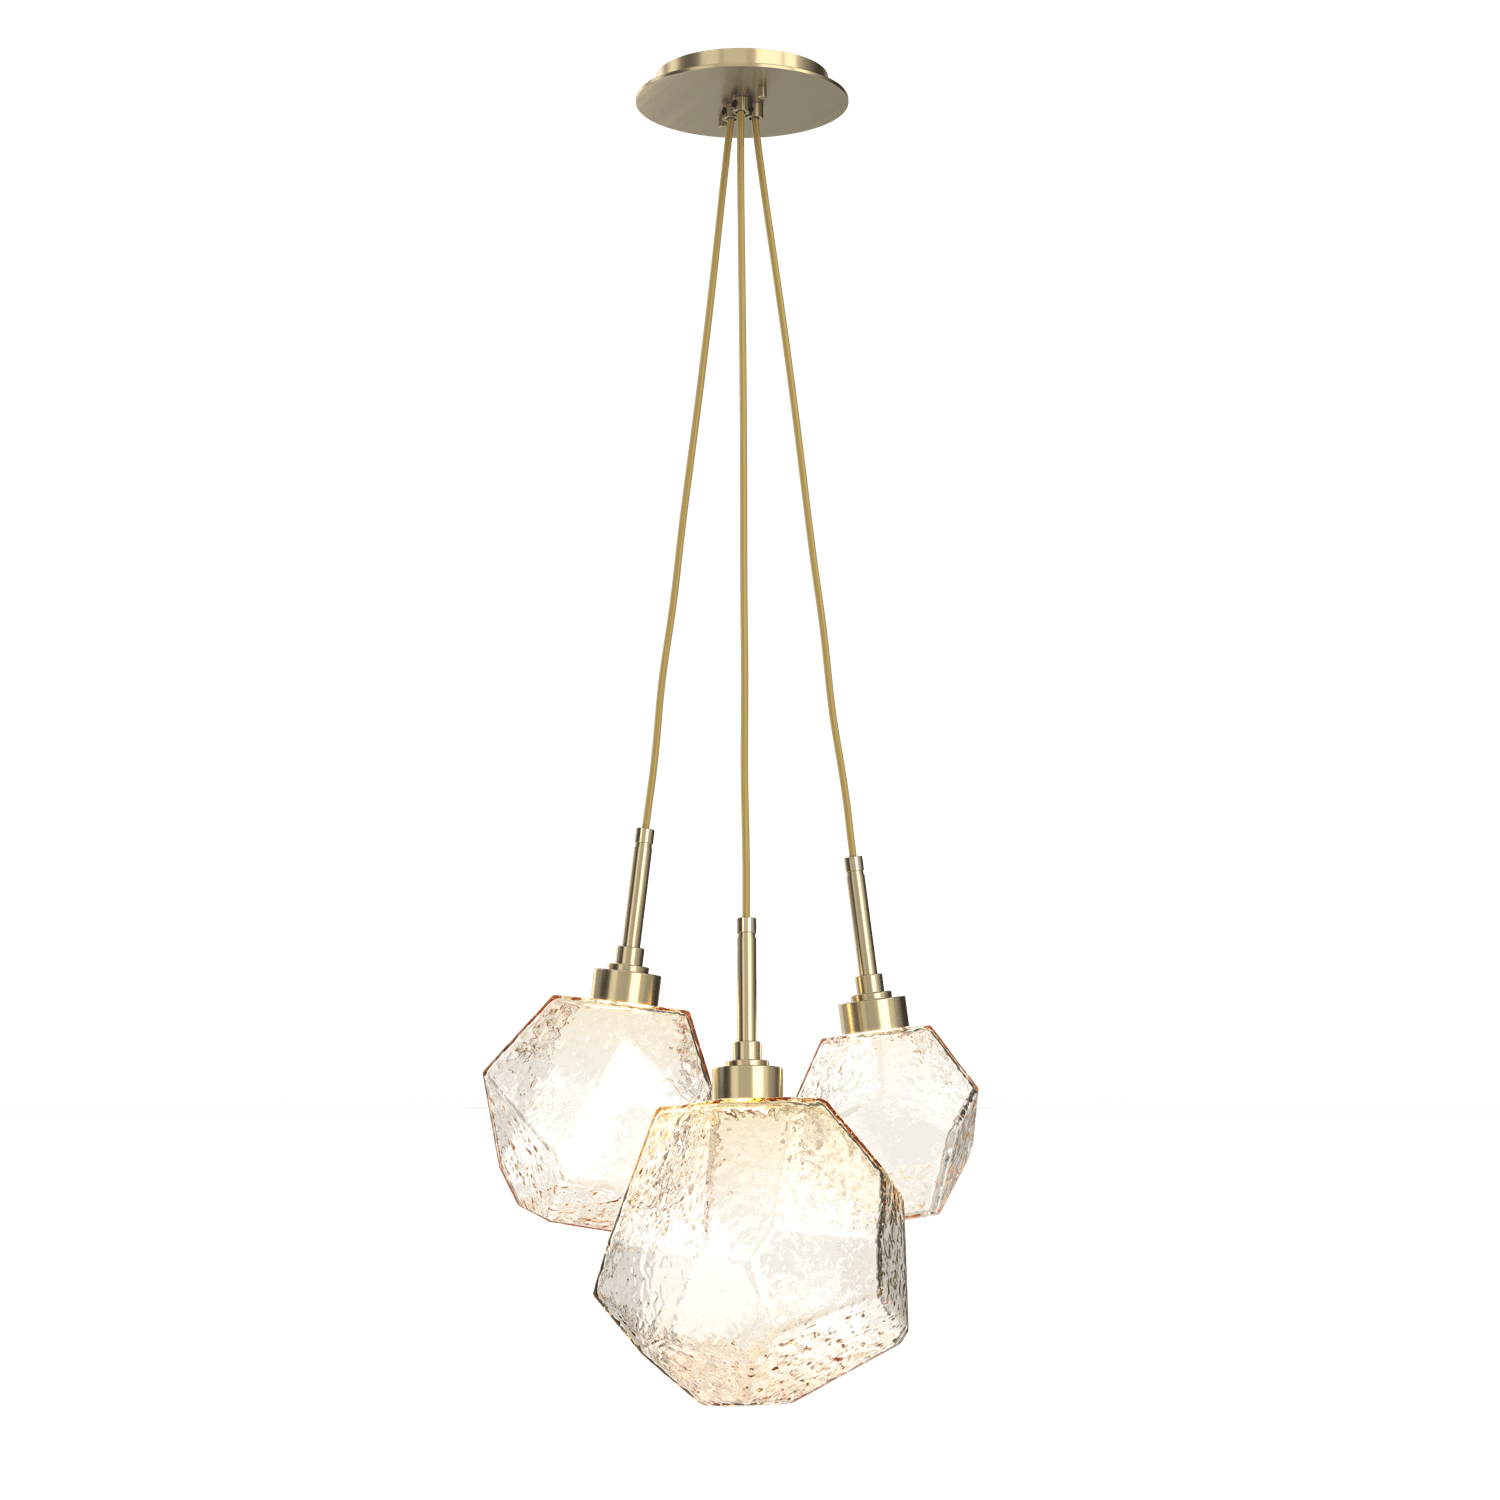 CHB0039-0E-HB-A-Hammerton-Studio-Gem-3-light-cluster-pendant-light-with-heritage-brass-finish-and-amber-blown-glass-shades-and-LED-lamping